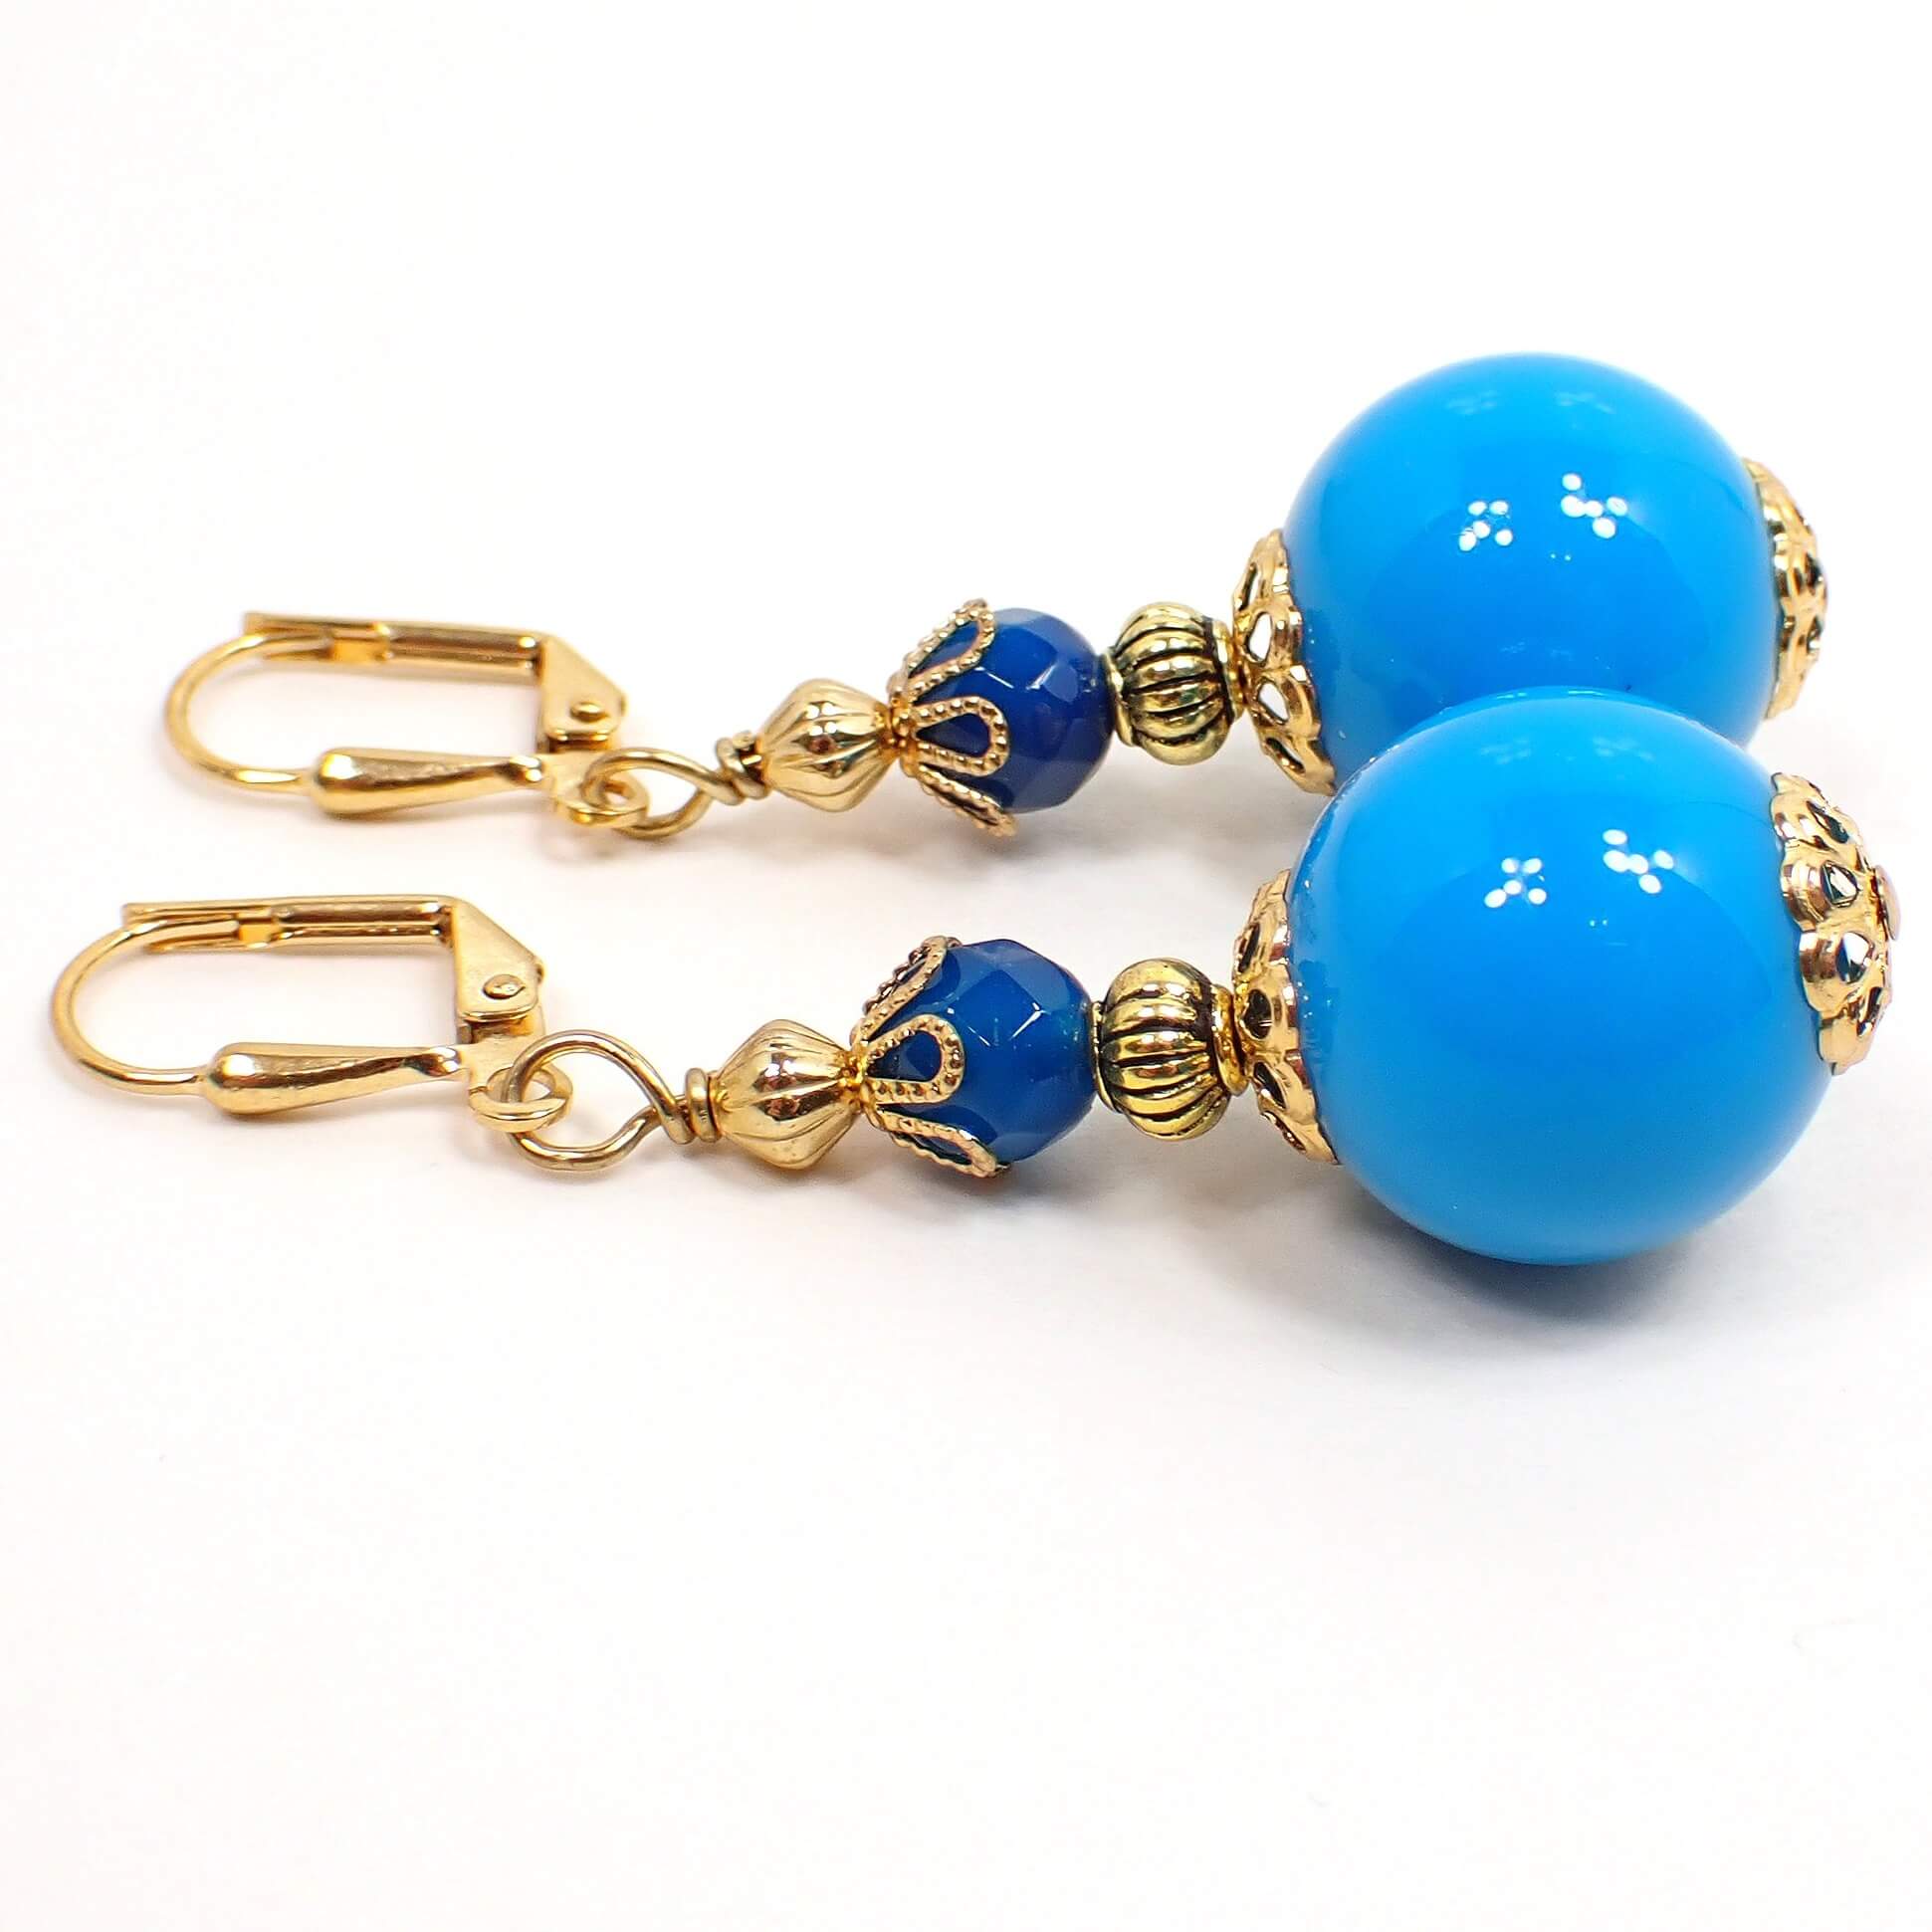 Side view of the handmade gumball drop earrings. The metal is gold plated in color. There is a new faceted glass bead in dark teal blue at the top and a bright blue vintage lucite round bead at the bottom.